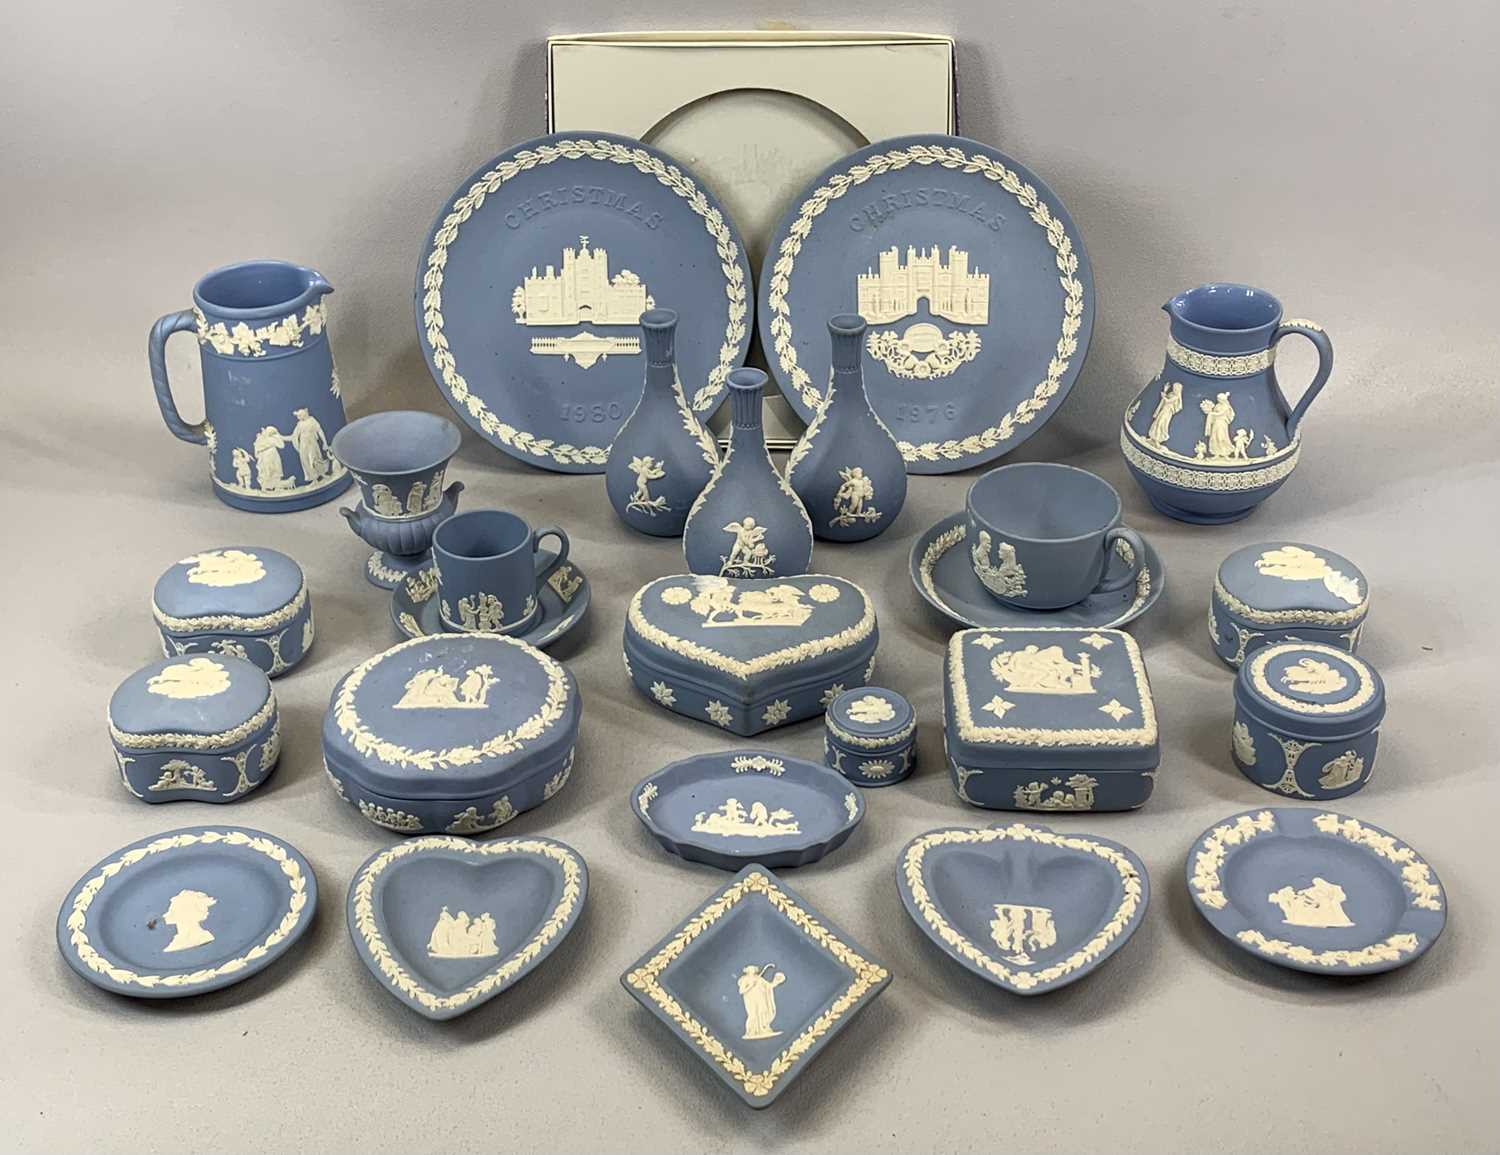 GROUP OF STAFFORDSHIRE POTTERY including Wedgwood blue Jasperware of jugs, plates, posy vases, - Image 2 of 5